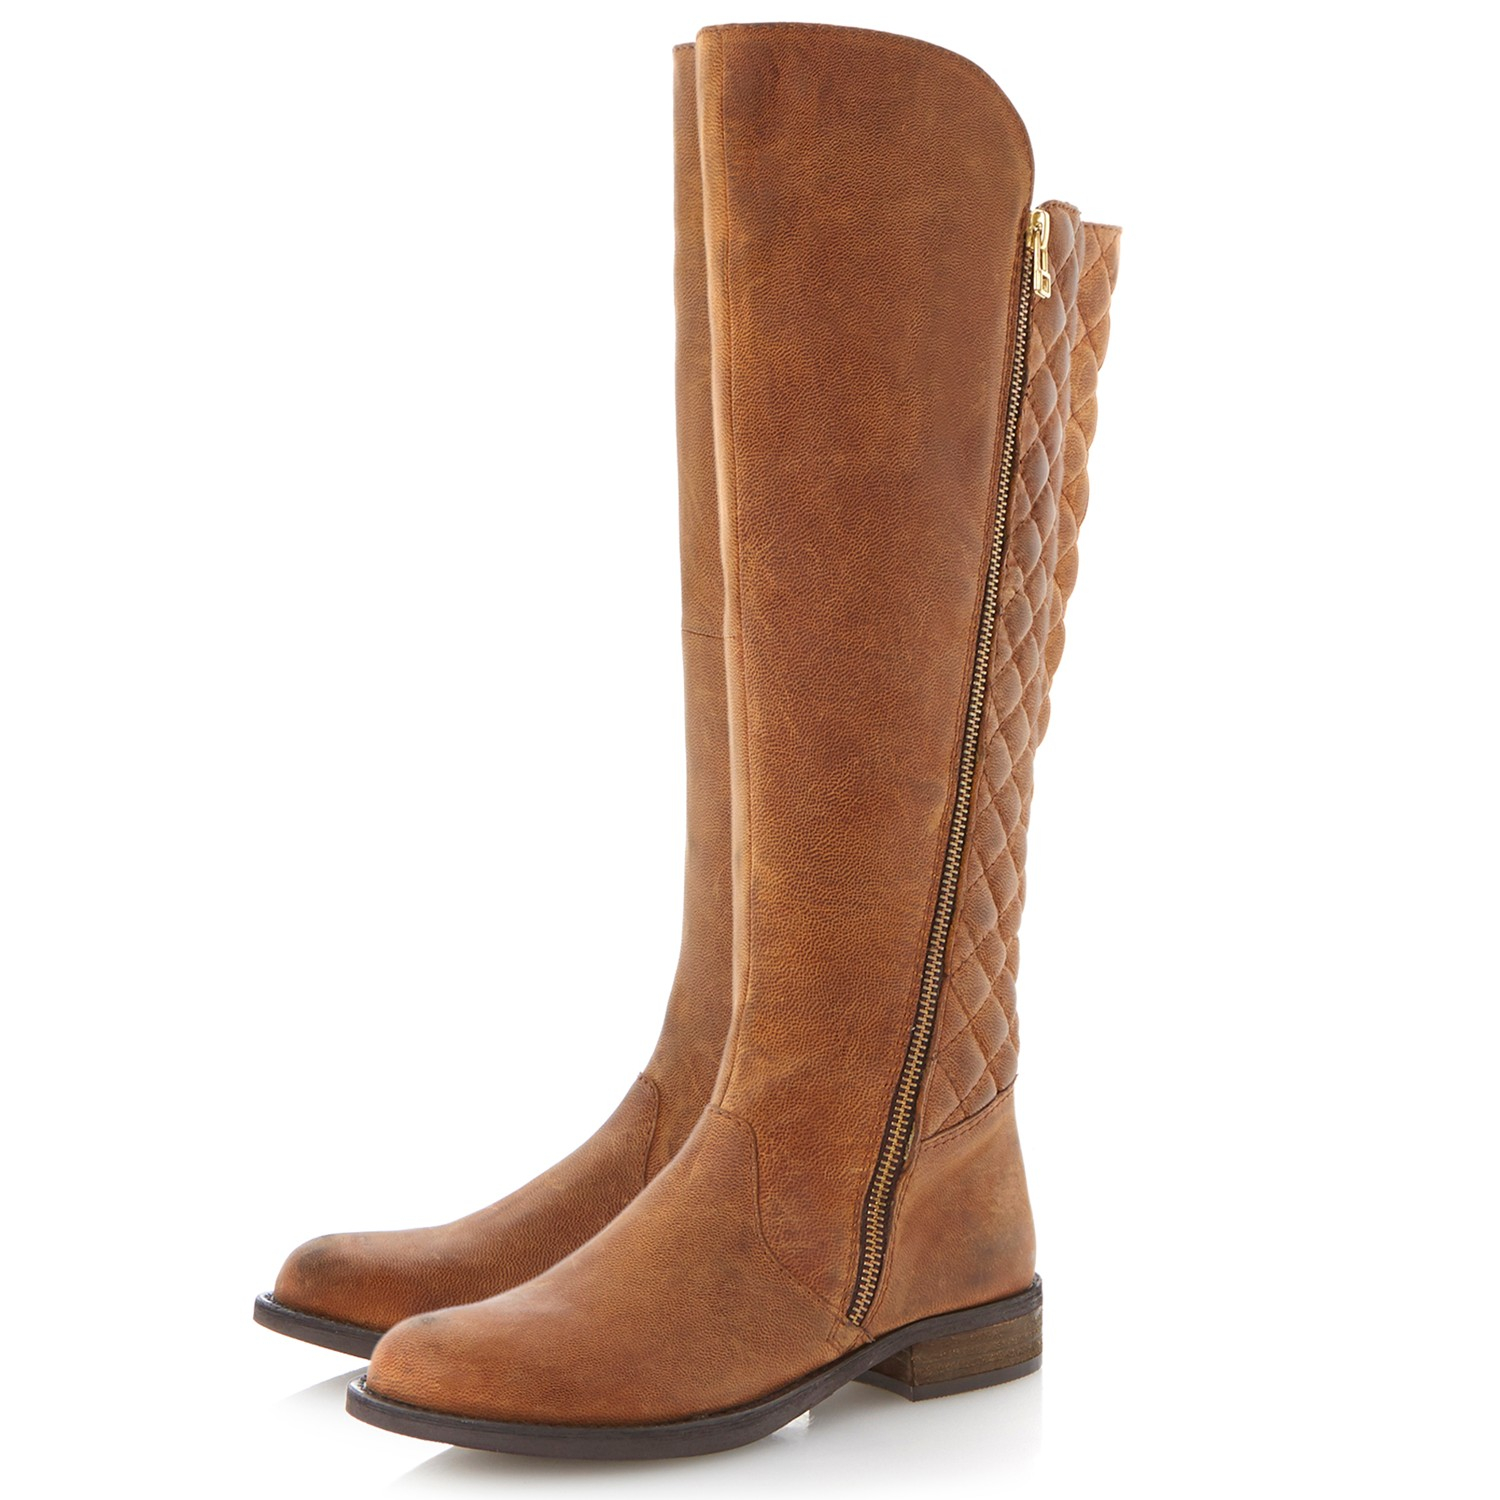 Steve Madden Northside Leather Knee High Boots in Brown (Tan) | Lyst